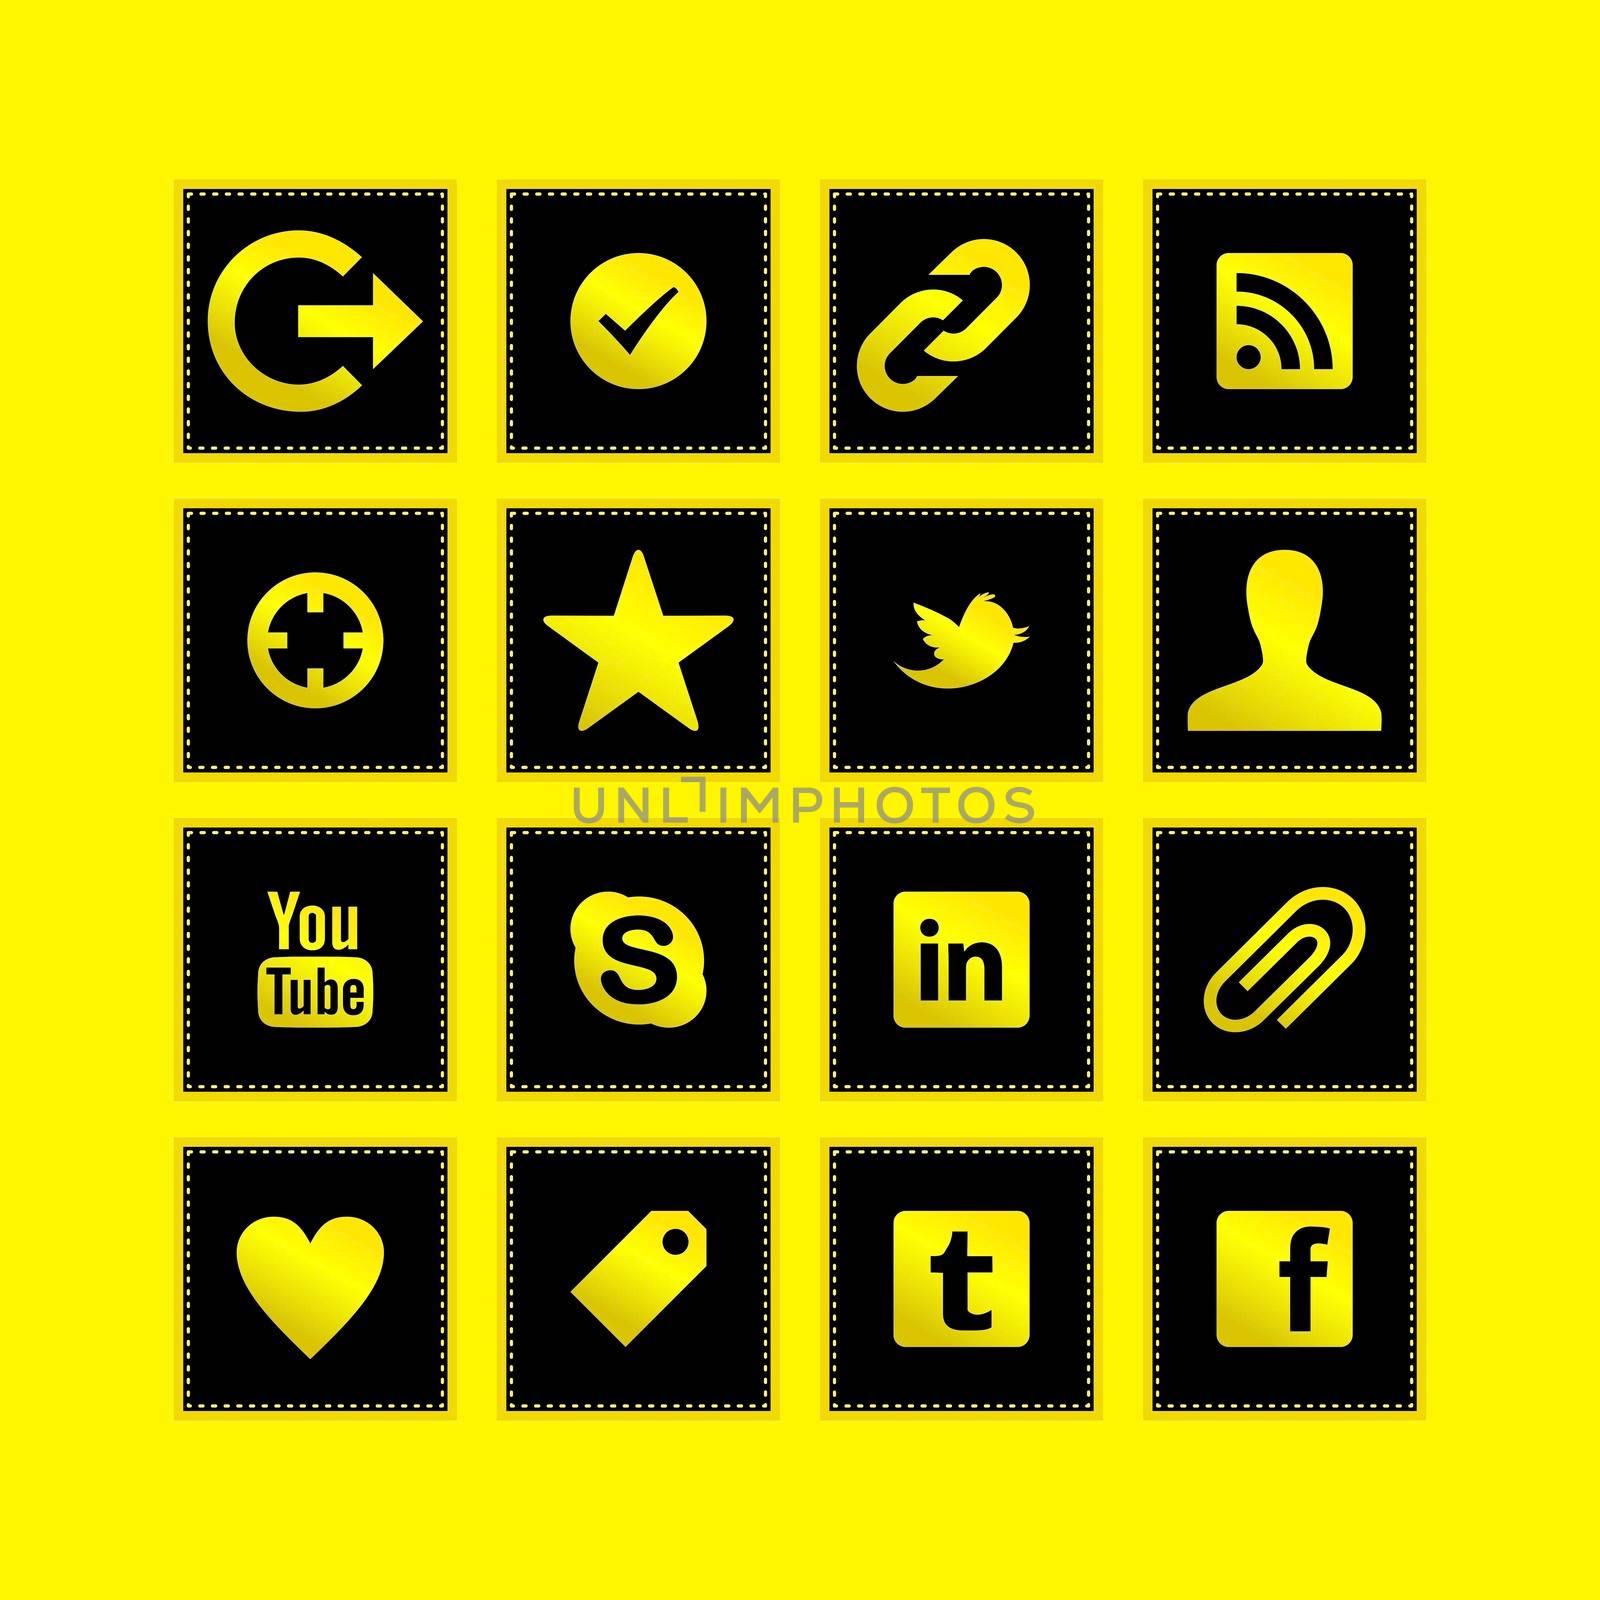 Yellow and black icon set by Crownaart